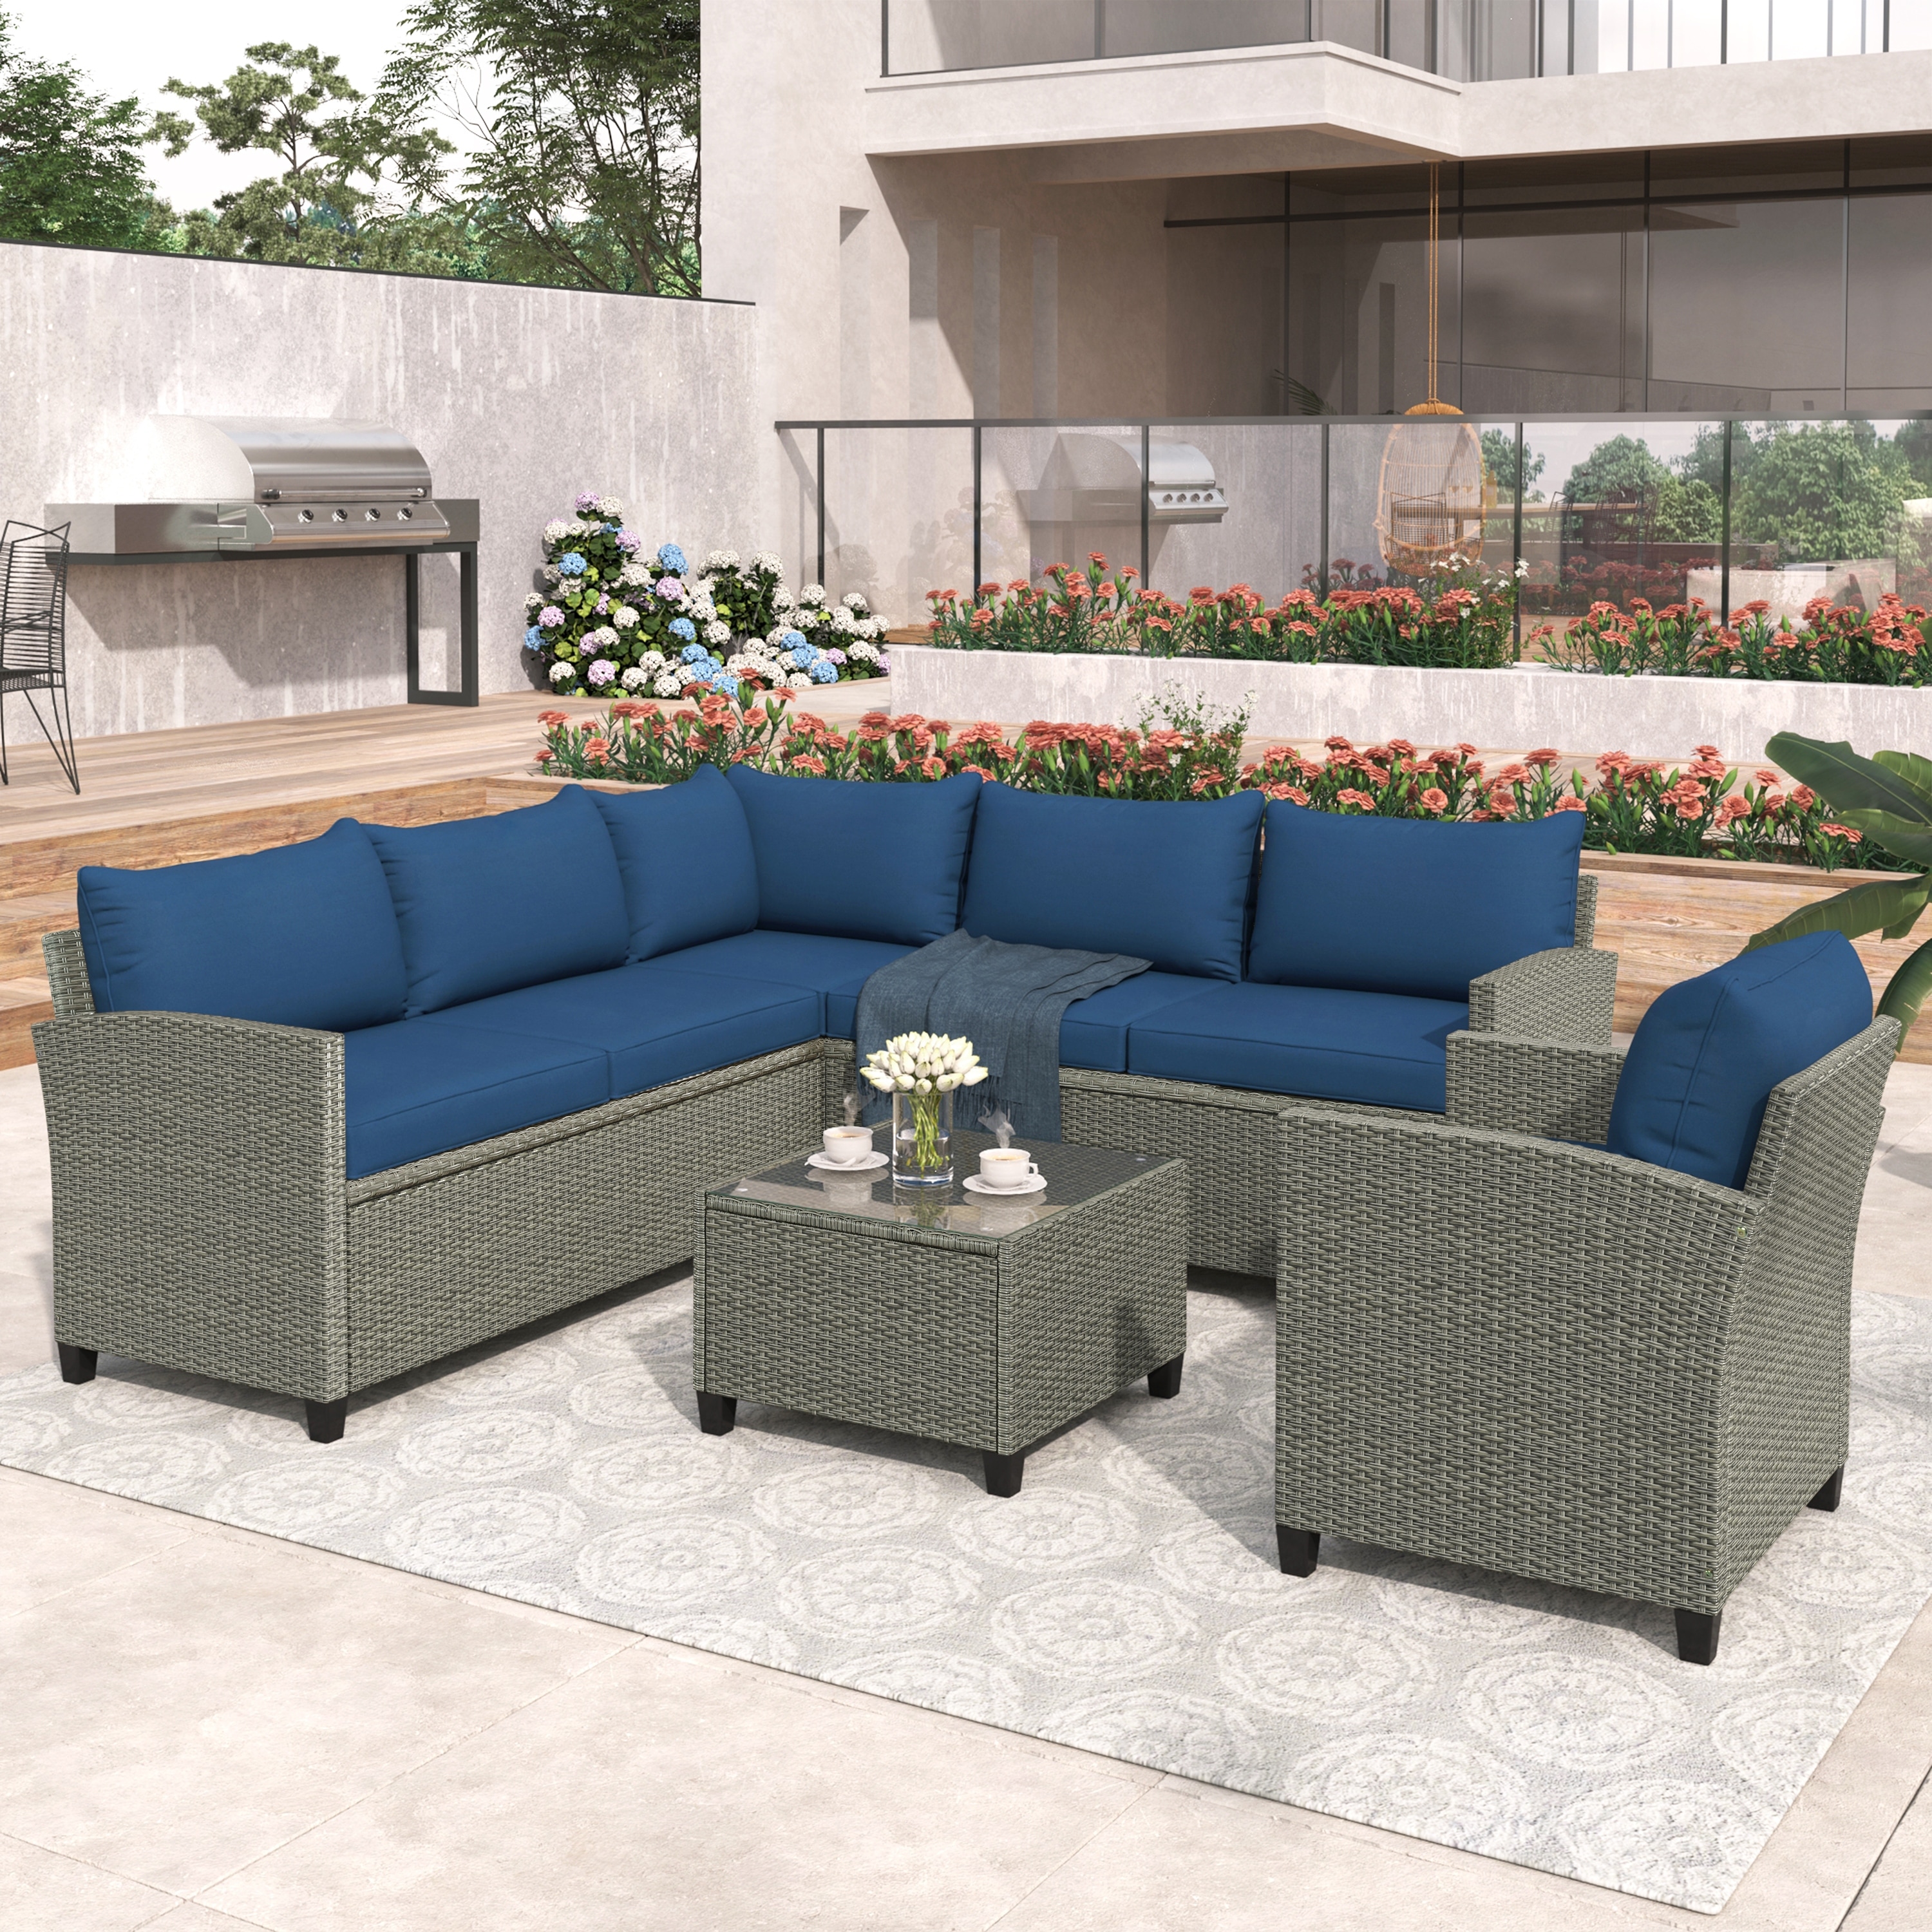 Modern 5-piece Outdoor Patio Furniture Sofa Set With Glass Top Coffee Table